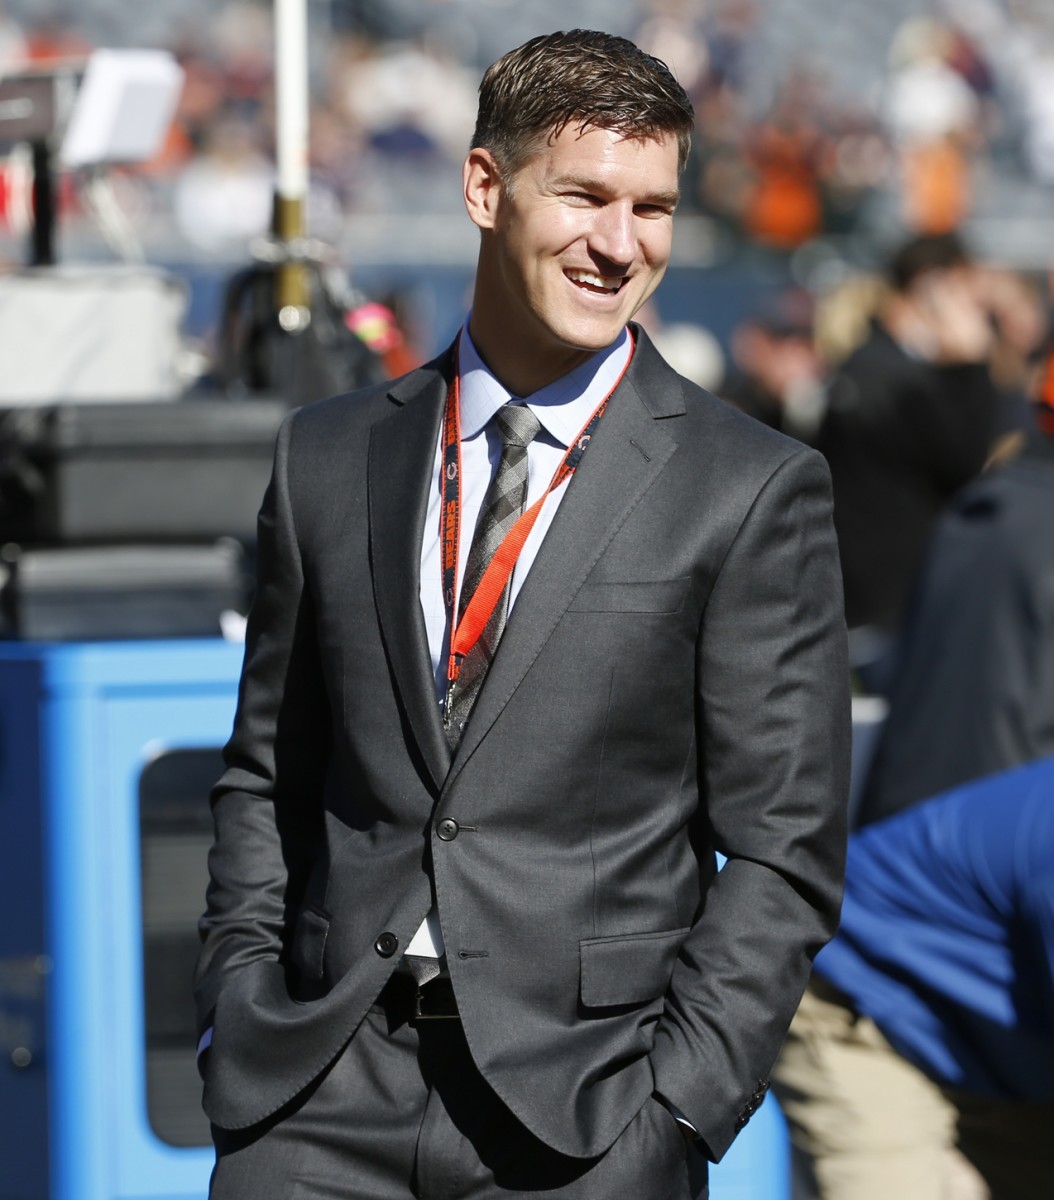 Former Chicago Bears General Manager and New Orleans Saints executive Ryan Pace. Mandatory Credit: Kamil Krzaczynski-USA TODAY Sports